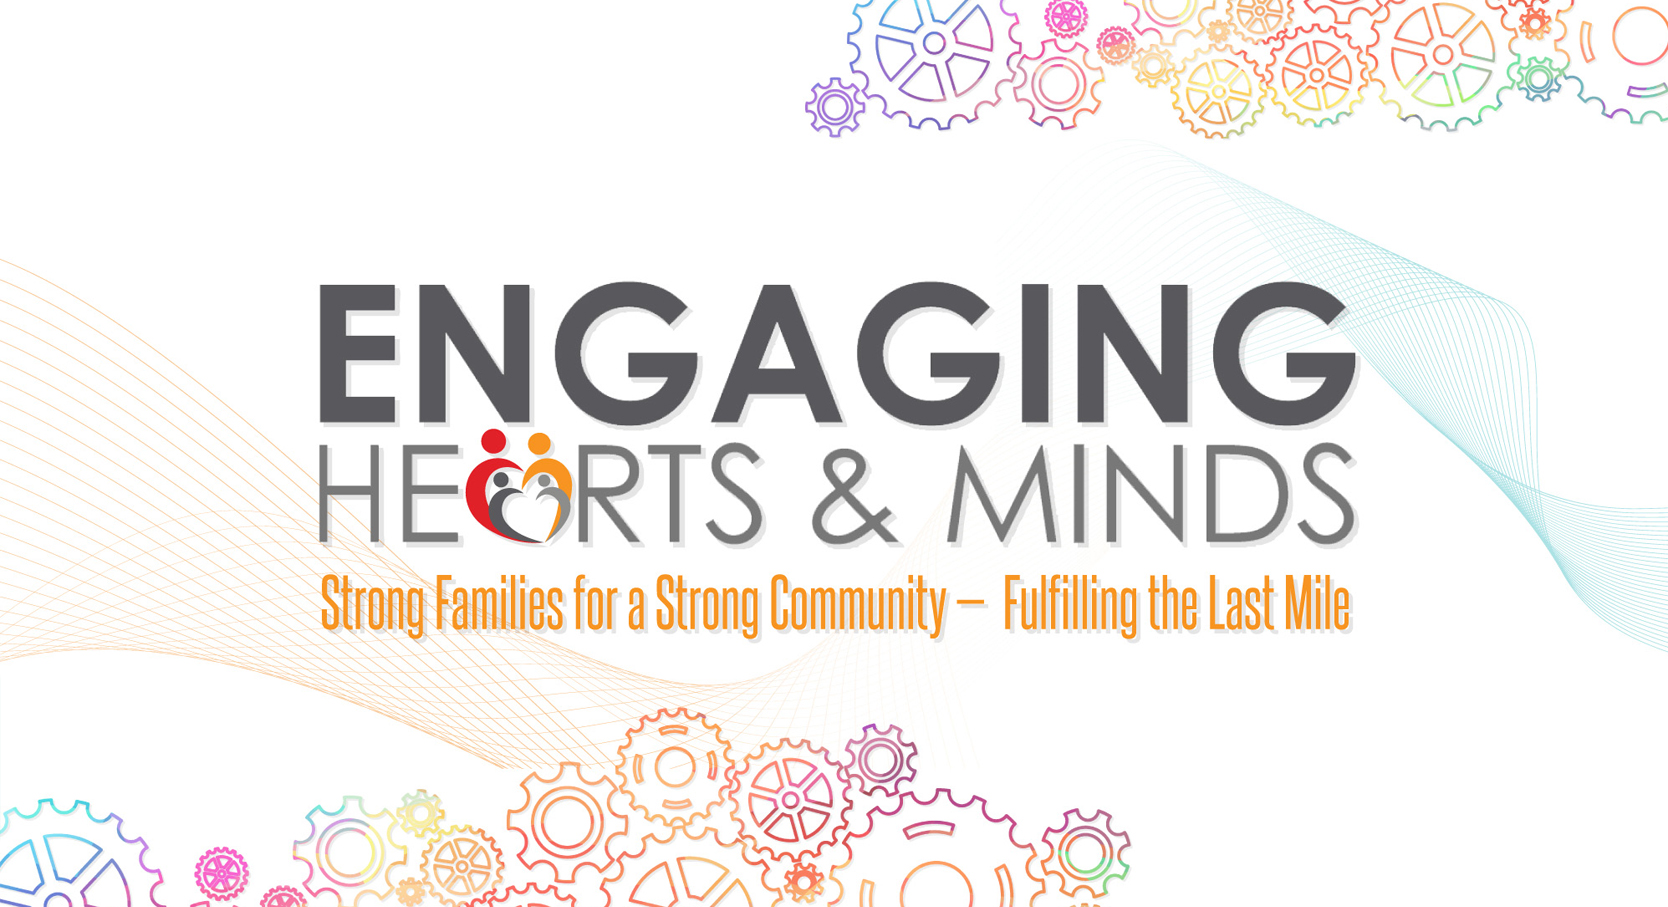 Engaging Hearts & Minds 2019